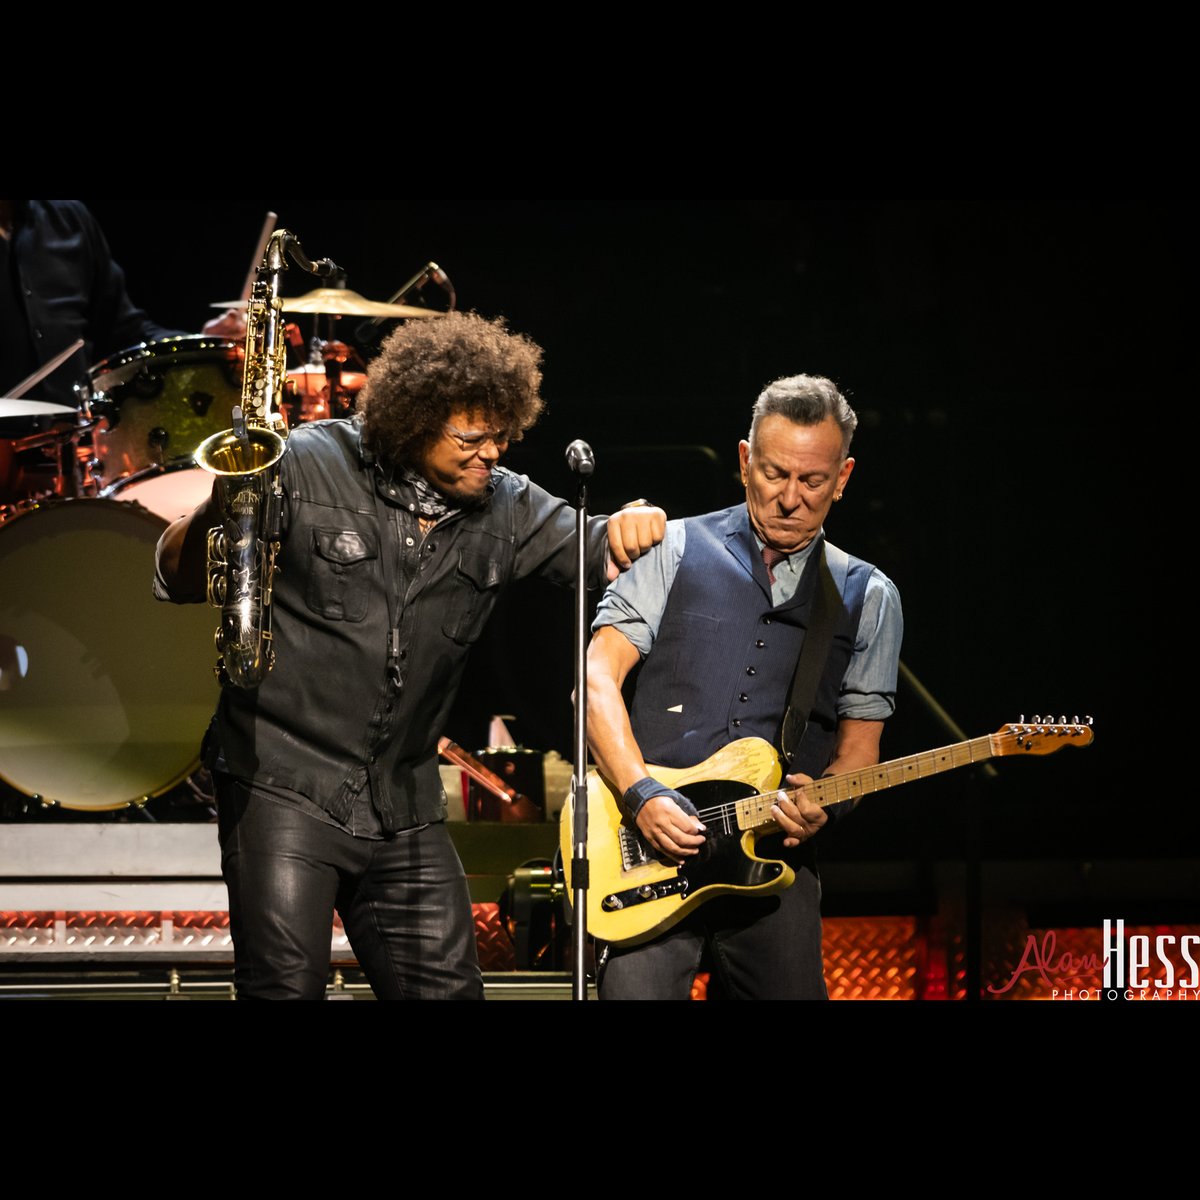 one more from the @springsteen show last night with @jakeclemons and Bruce. What a great night, Great show.